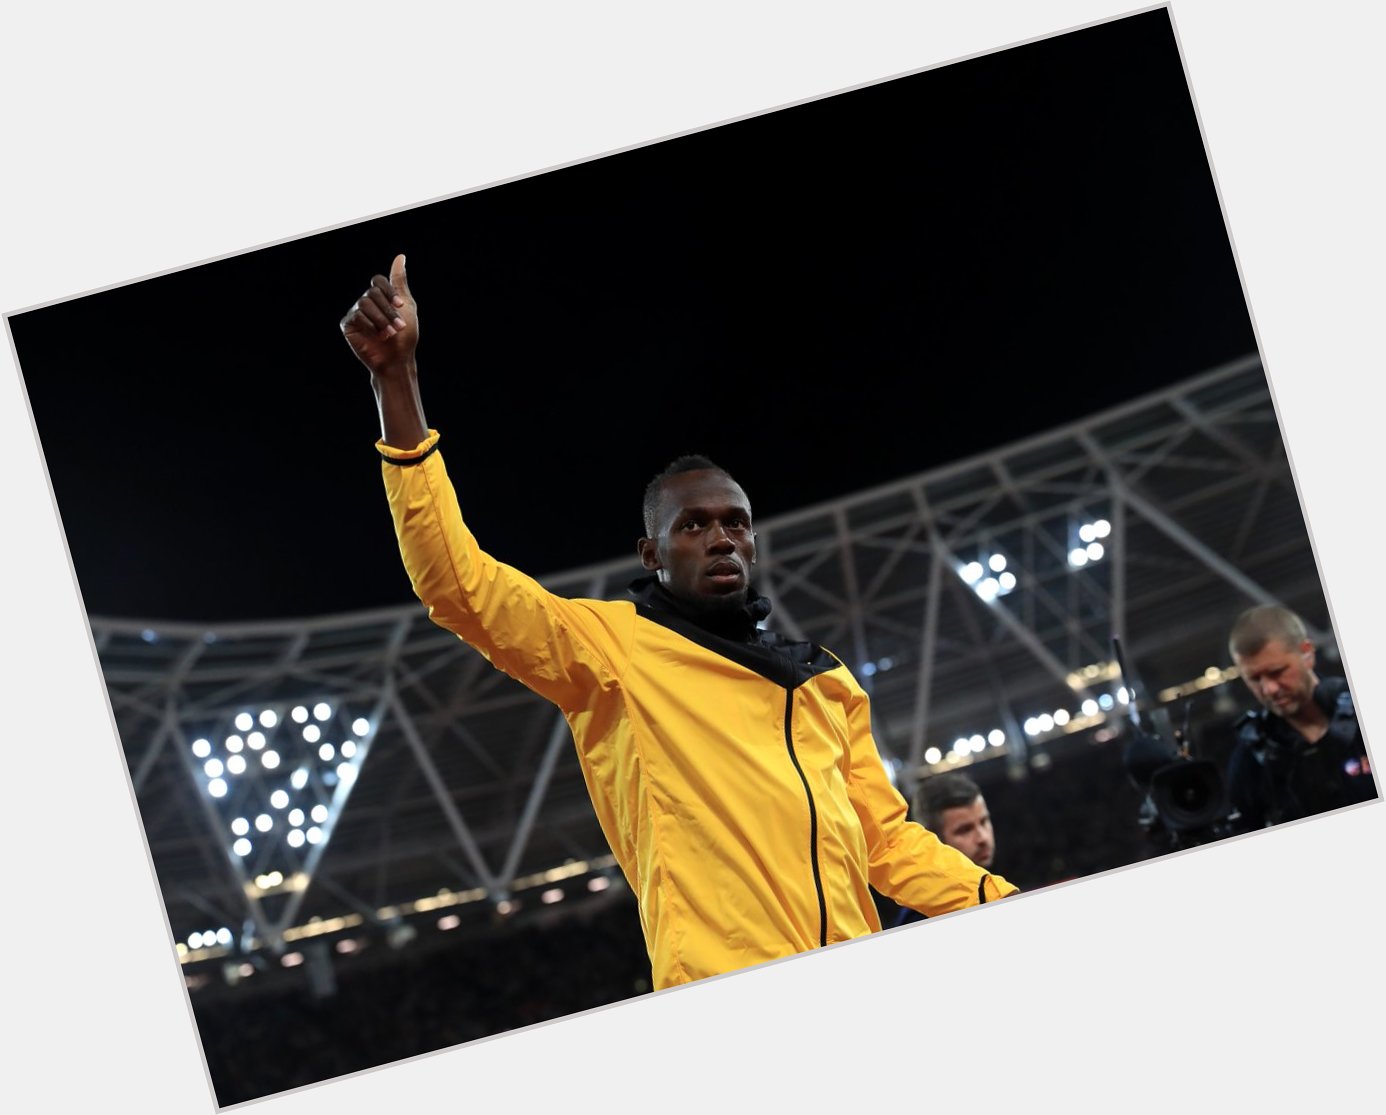 Happy 31st birthday to one of the greatest Athlete\s ever, Usain Bolt  